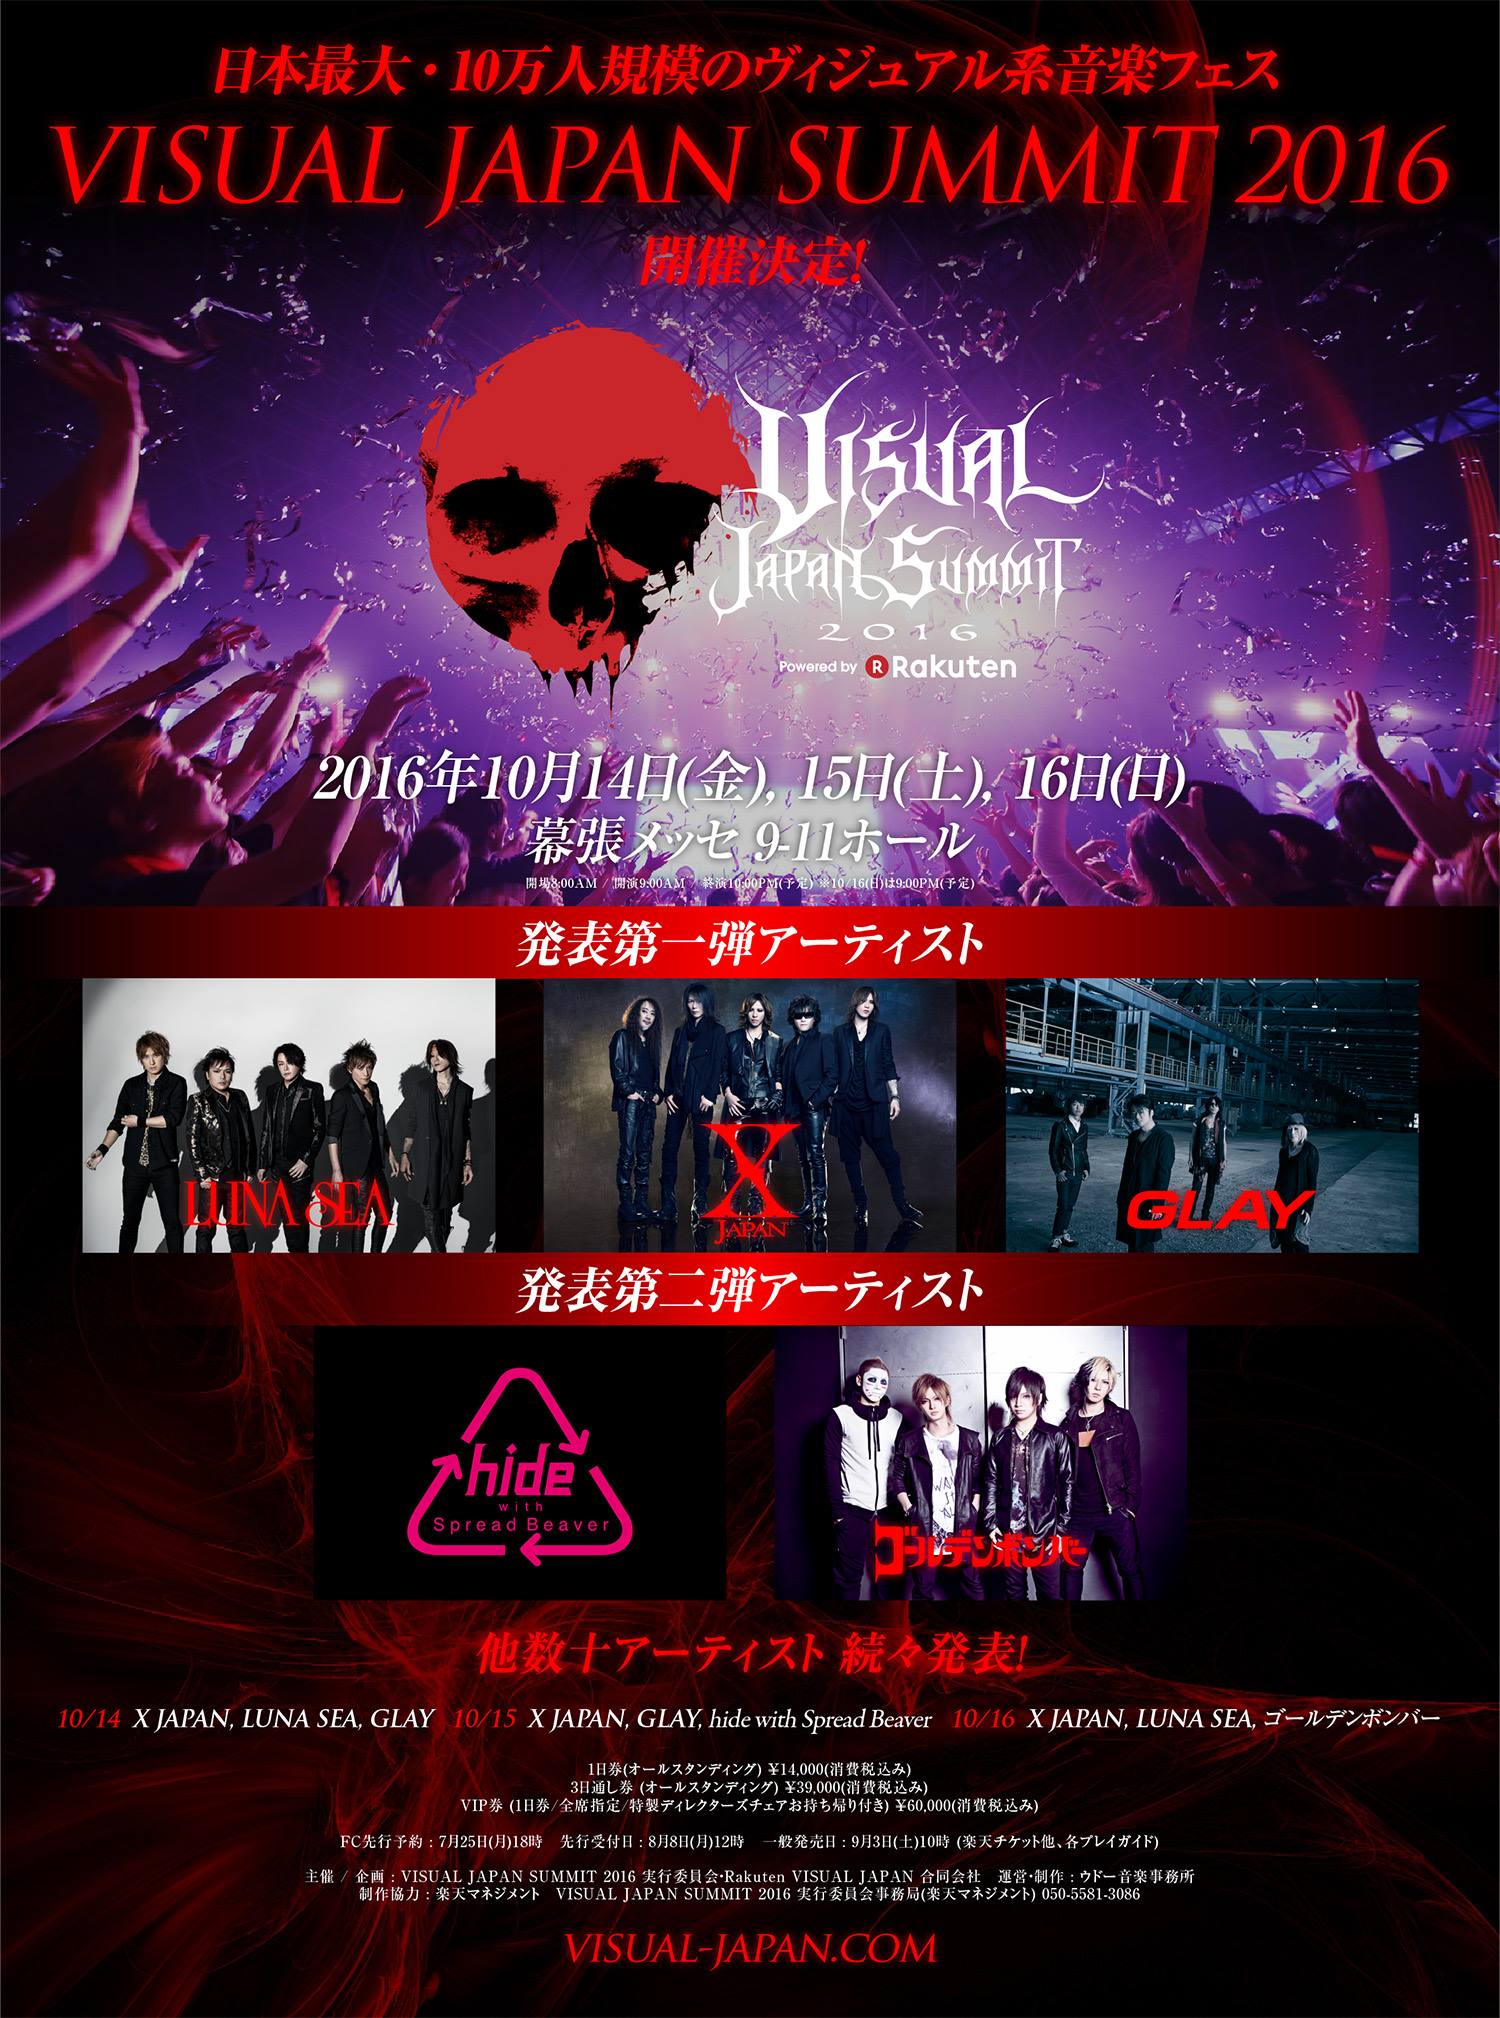 Legends of Japanese visual rock to come together to perform